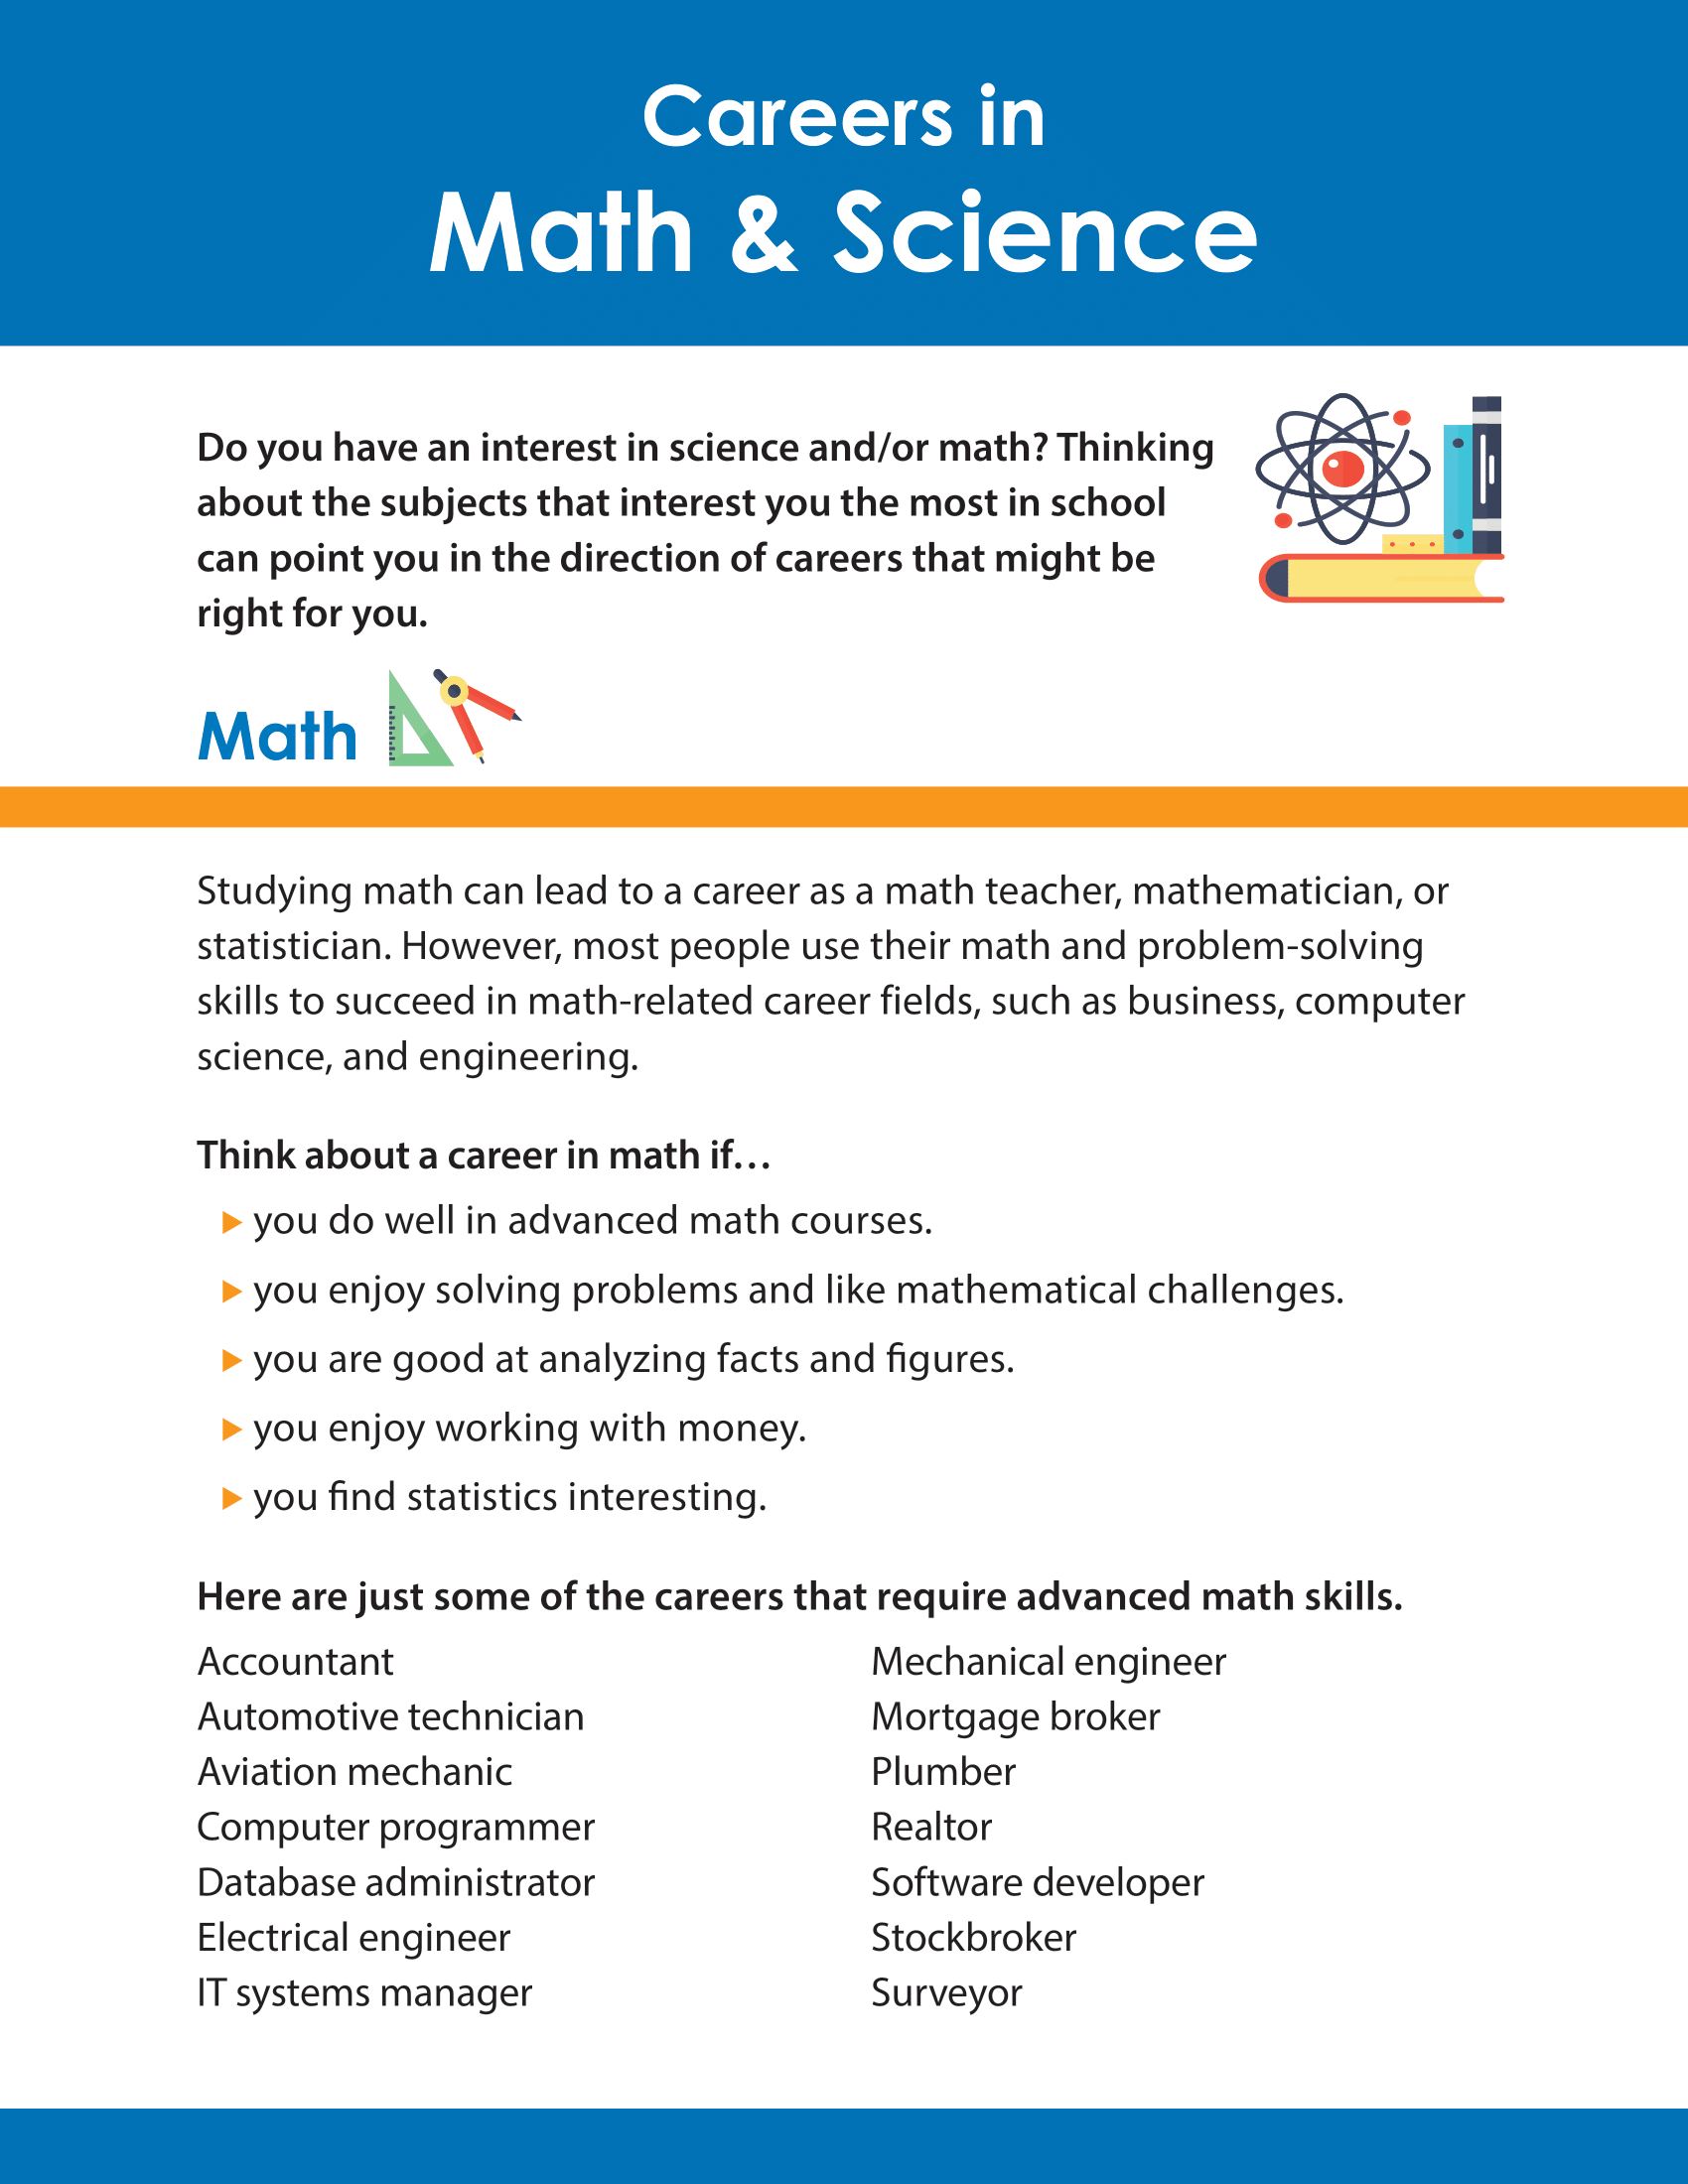 Careers in Math and Science